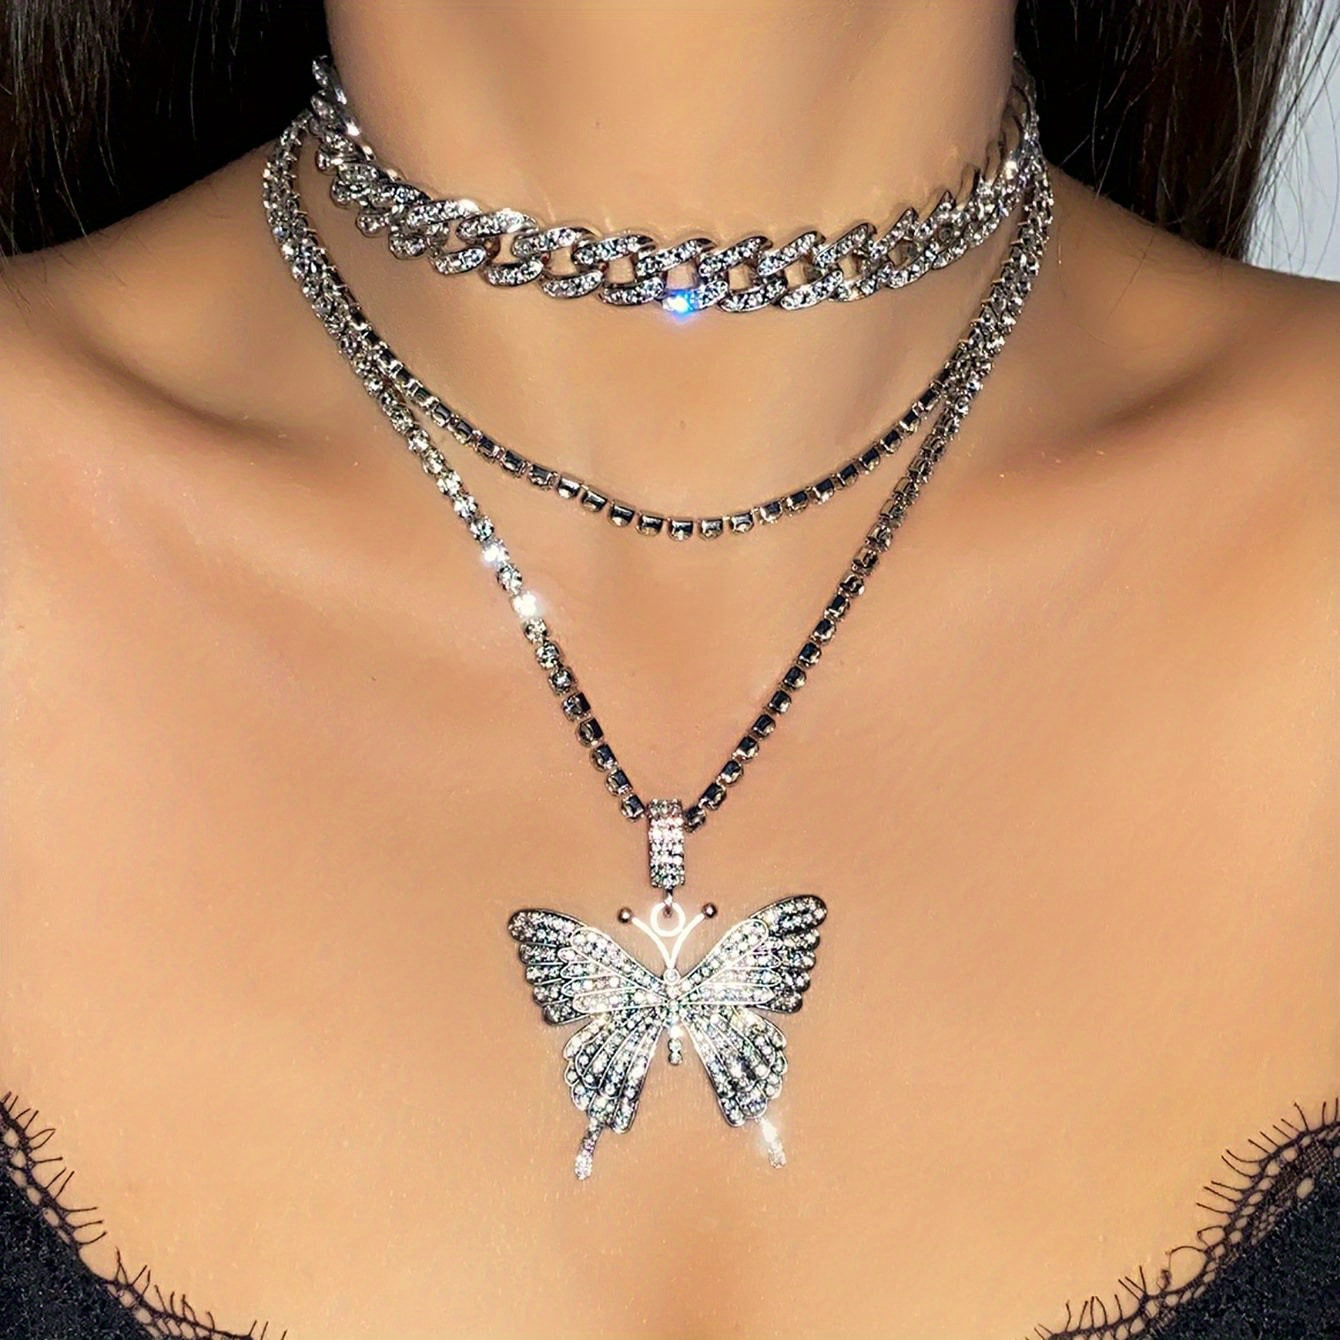 Gorgeous 3-Piece Vintage Butterfly Rhinestone Necklace Set - Adjustable Cuban Chain Chain